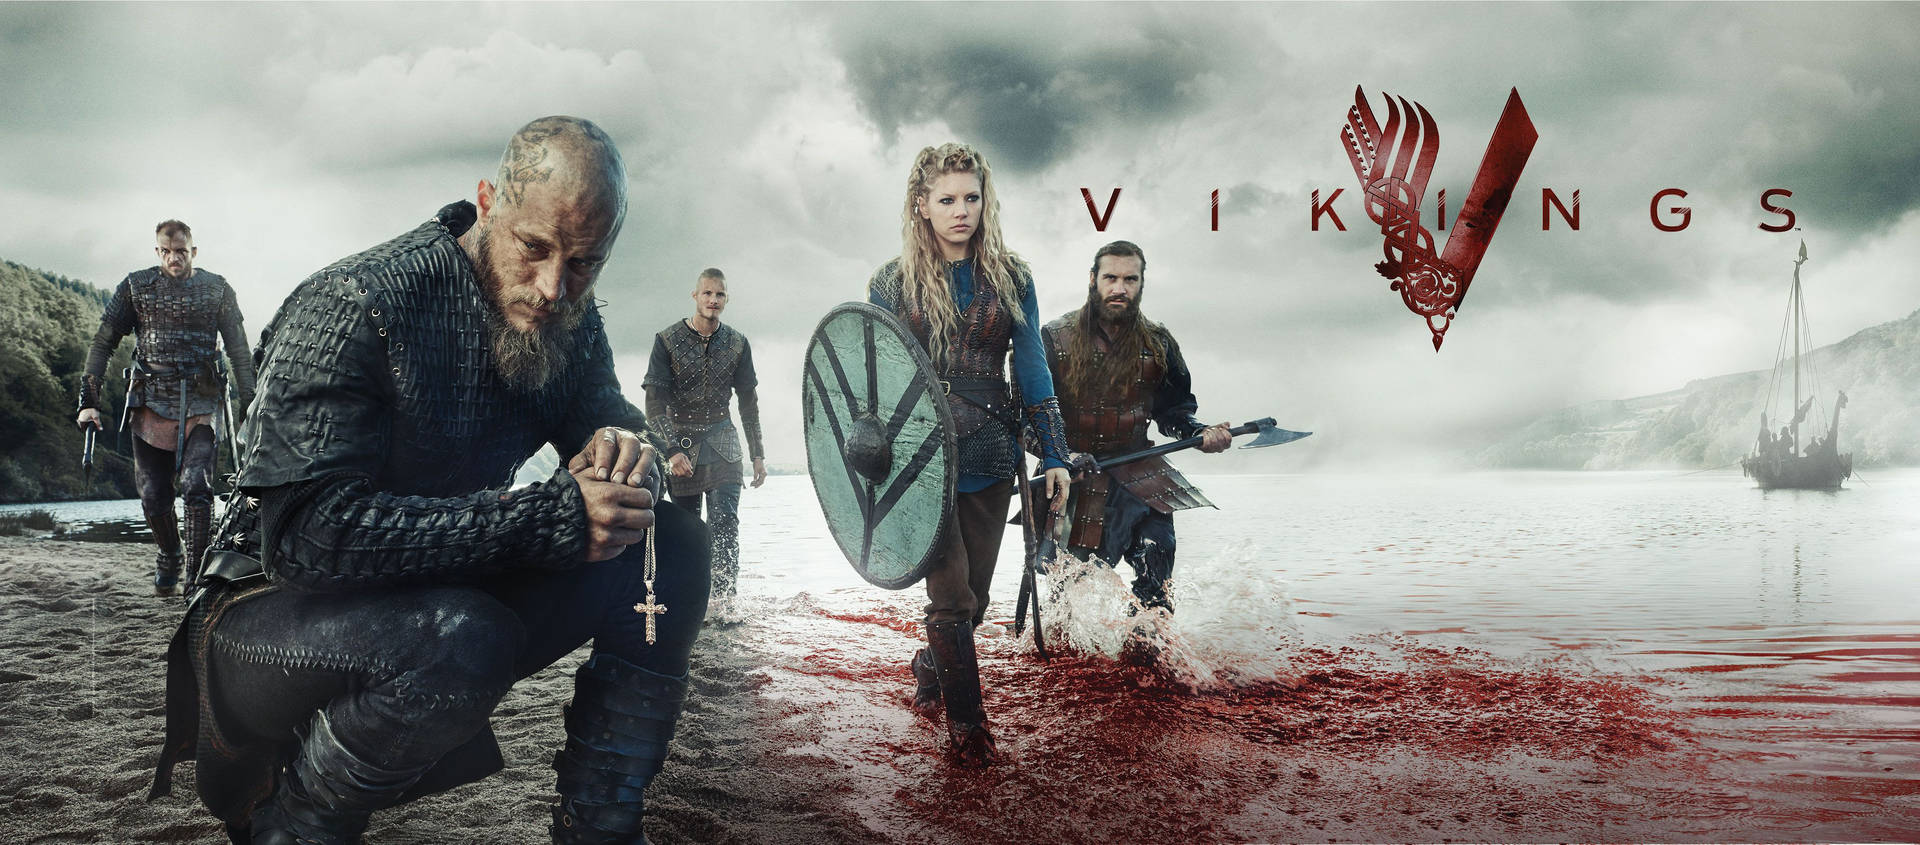 Vikings Characters On Show Poster